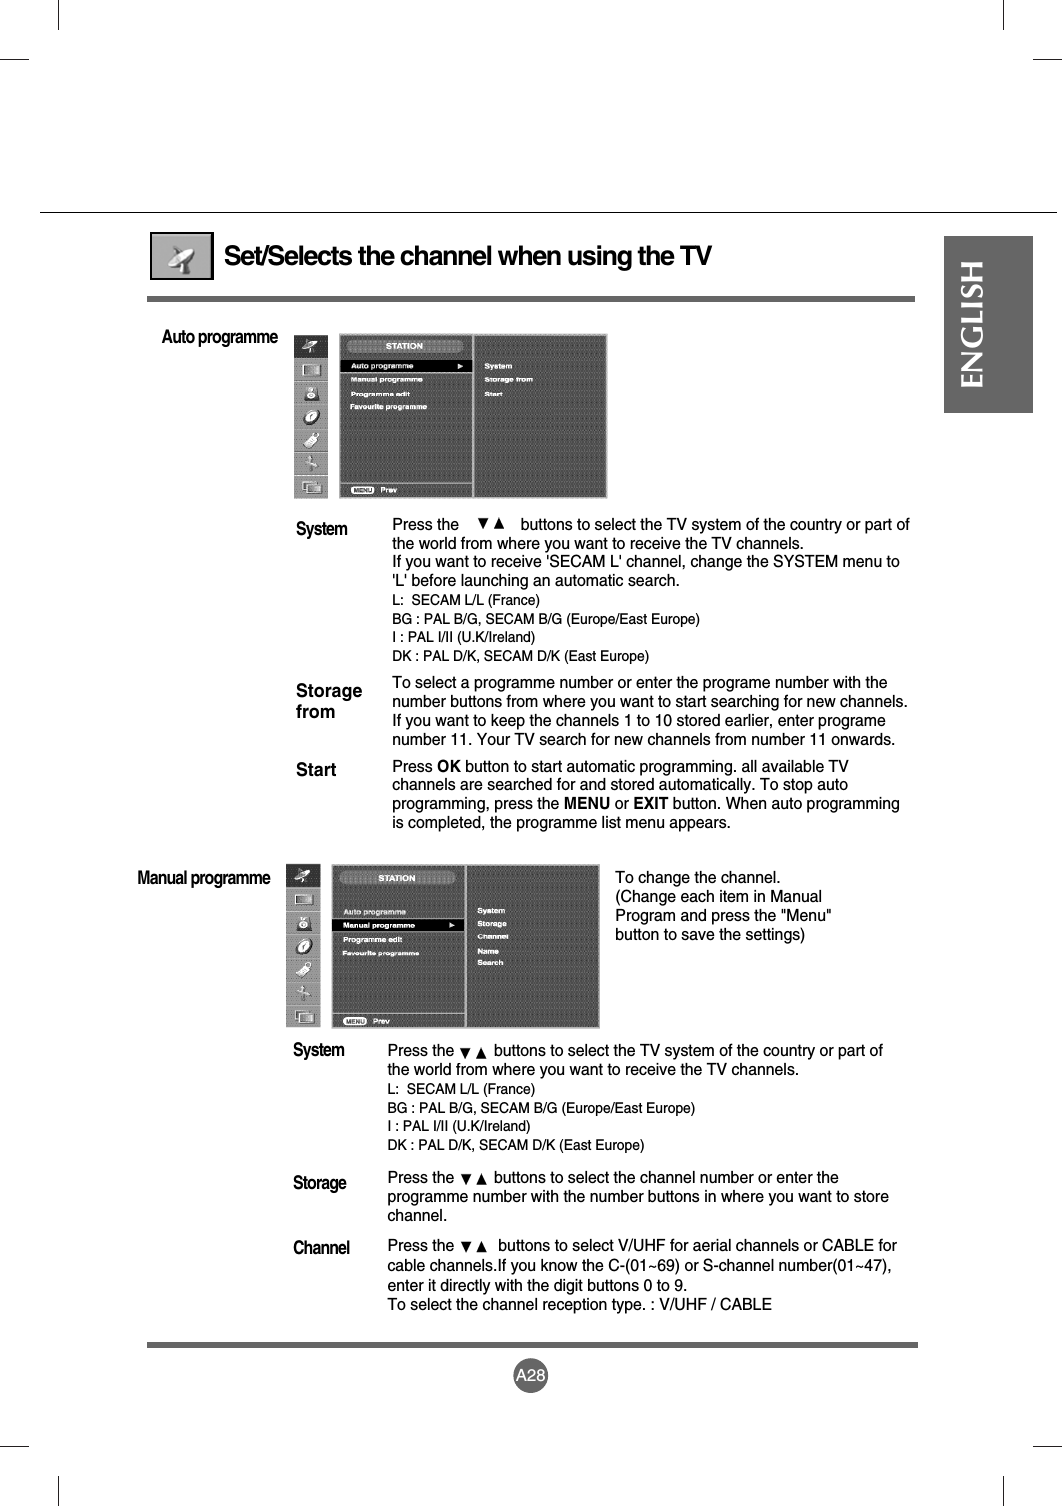 A28ENGLISHSet/Selects the channel when using the TV Press the              buttons to select the TV system of the country or part ofthe world from where you want to receive the TV channels. If you want to receive &apos;SECAM L&apos; channel, change the SYSTEM menu to&apos;L&apos; before launching an automatic search.L:  SECAM L/L (France)BG : PAL B/G, SECAM B/G (Europe/East Europe)I : PAL I/II (U.K/Ireland)DK : PAL D/K, SECAM D/K (East Europe)To select a programme number or enter the programe number with thenumber buttons from where you want to start searching for new channels.If you want to keep the channels 1 to 10 stored earlier, enter programenumber 11. Your TV search for new channels from number 11 onwards.Press OK button to start automatic programming. all available TVchannels are searched for and stored automatically. To stop autoprogramming, press the MENU or EXIT button. When auto programmingis completed, the programme list menu appears.SystemStoragefromStartAuto programmePress the         buttons to select the TV system of the country or part ofthe world from where you want to receive the TV channels. L:  SECAM L/L (France)BG : PAL B/G, SECAM B/G (Europe/East Europe)I : PAL I/II (U.K/Ireland)DK : PAL D/K, SECAM D/K (East Europe)Press the         buttons to select the channel number or enter theprogramme number with the number buttons in where you want to storechannel.Press the          buttons to select V/UHF for aerial channels or CABLE forcable channels.If you know the C-(01~69) or S-channel number(01~47),enter it directly with the digit buttons 0 to 9.To select the channel reception type. : V/UHF / CABLESystemStorageChannelManual programmeTo change the channel.(Change each item in ManualProgram and press the &quot;Menu&quot;button to save the settings)